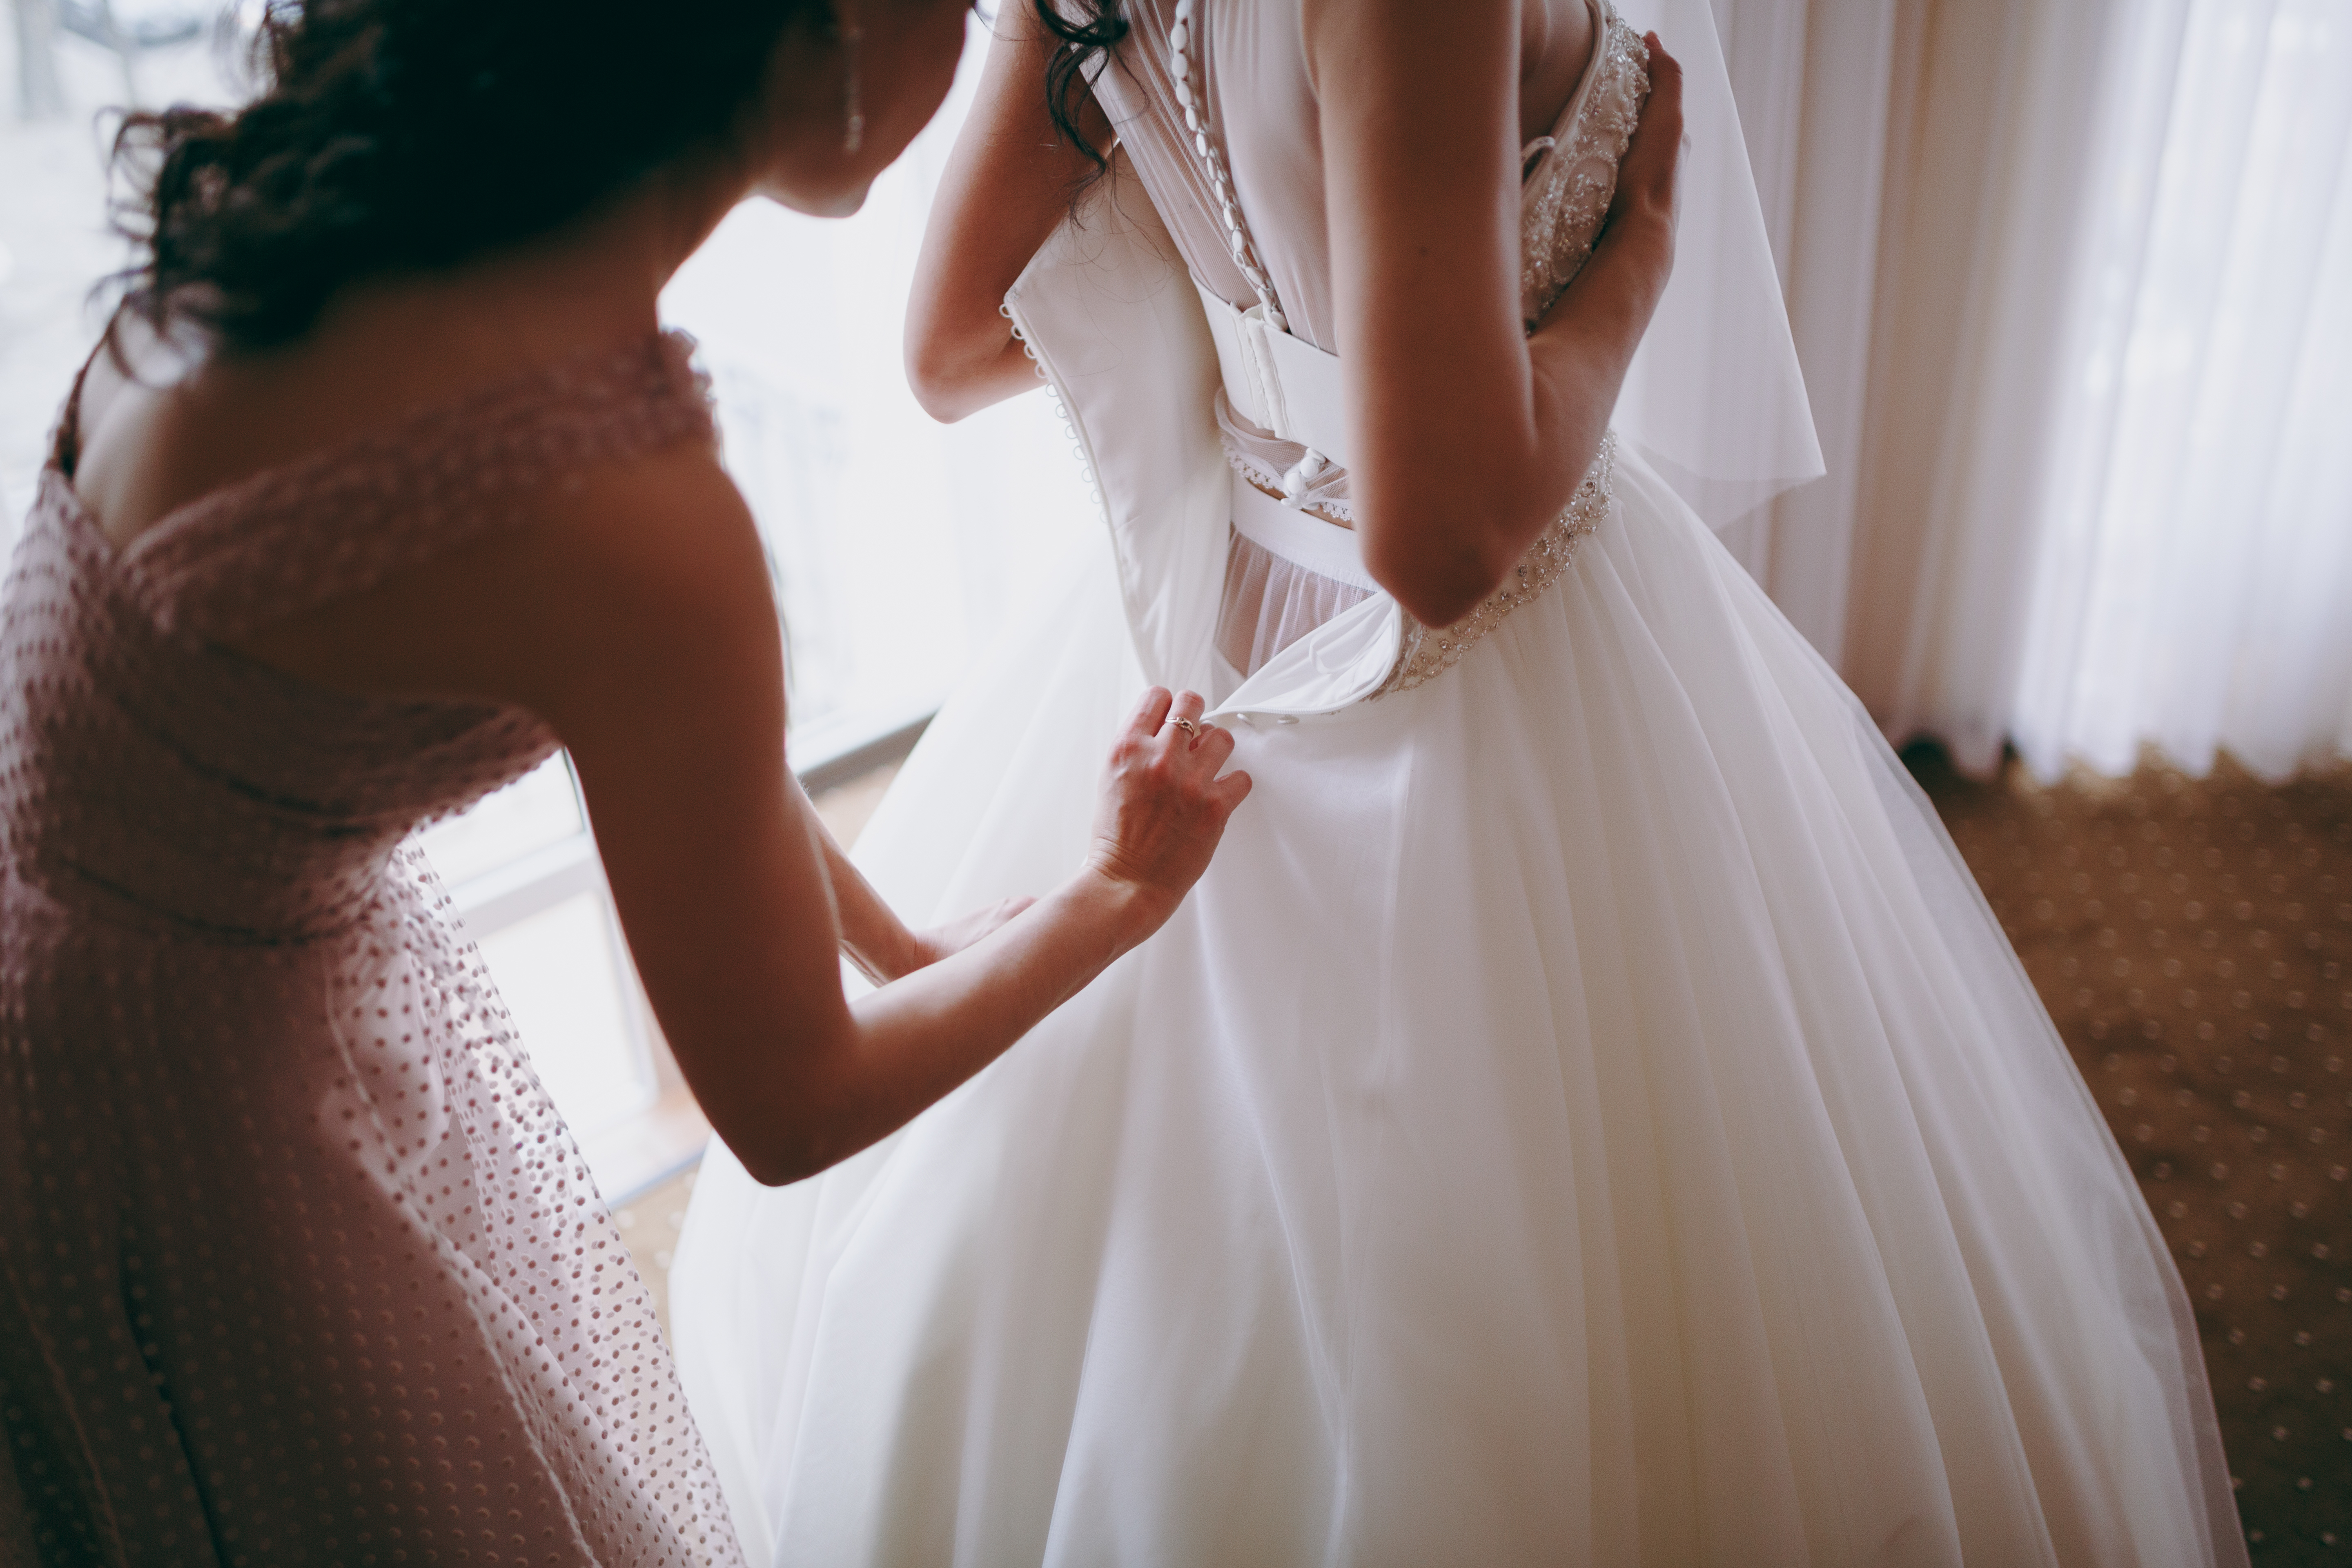 A woman helping a bride put on her bridal dress | Source: Shutterstock